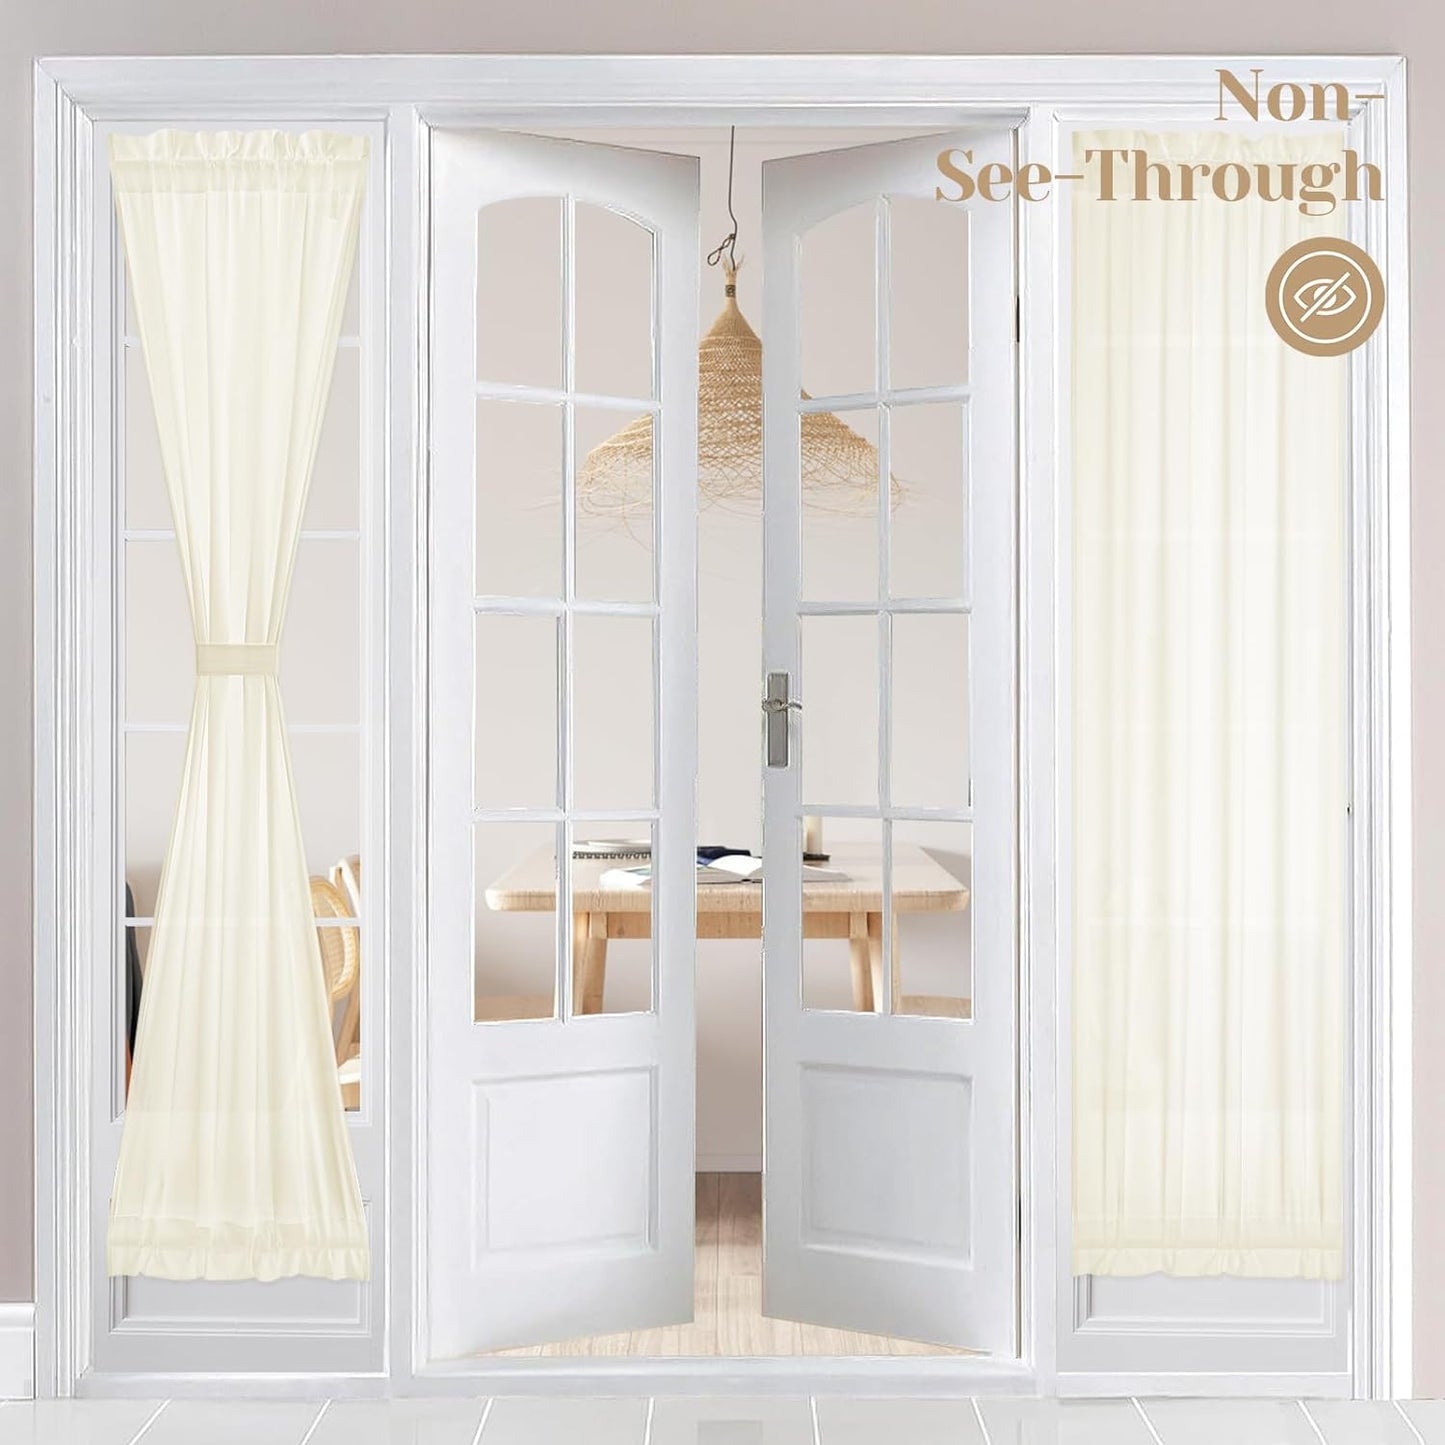 HOMEIDEAS Non-See-Through Sidelight Curtains for Front Door, Privacy Semi Sheer Door Window Curtains, Rod Pocket Light Filtering French Door Curtains with Tieback, (1 Panel, White, 26W X 72L)  HOMEIDEAS Cream Beige 2 Panels-26 X 72 